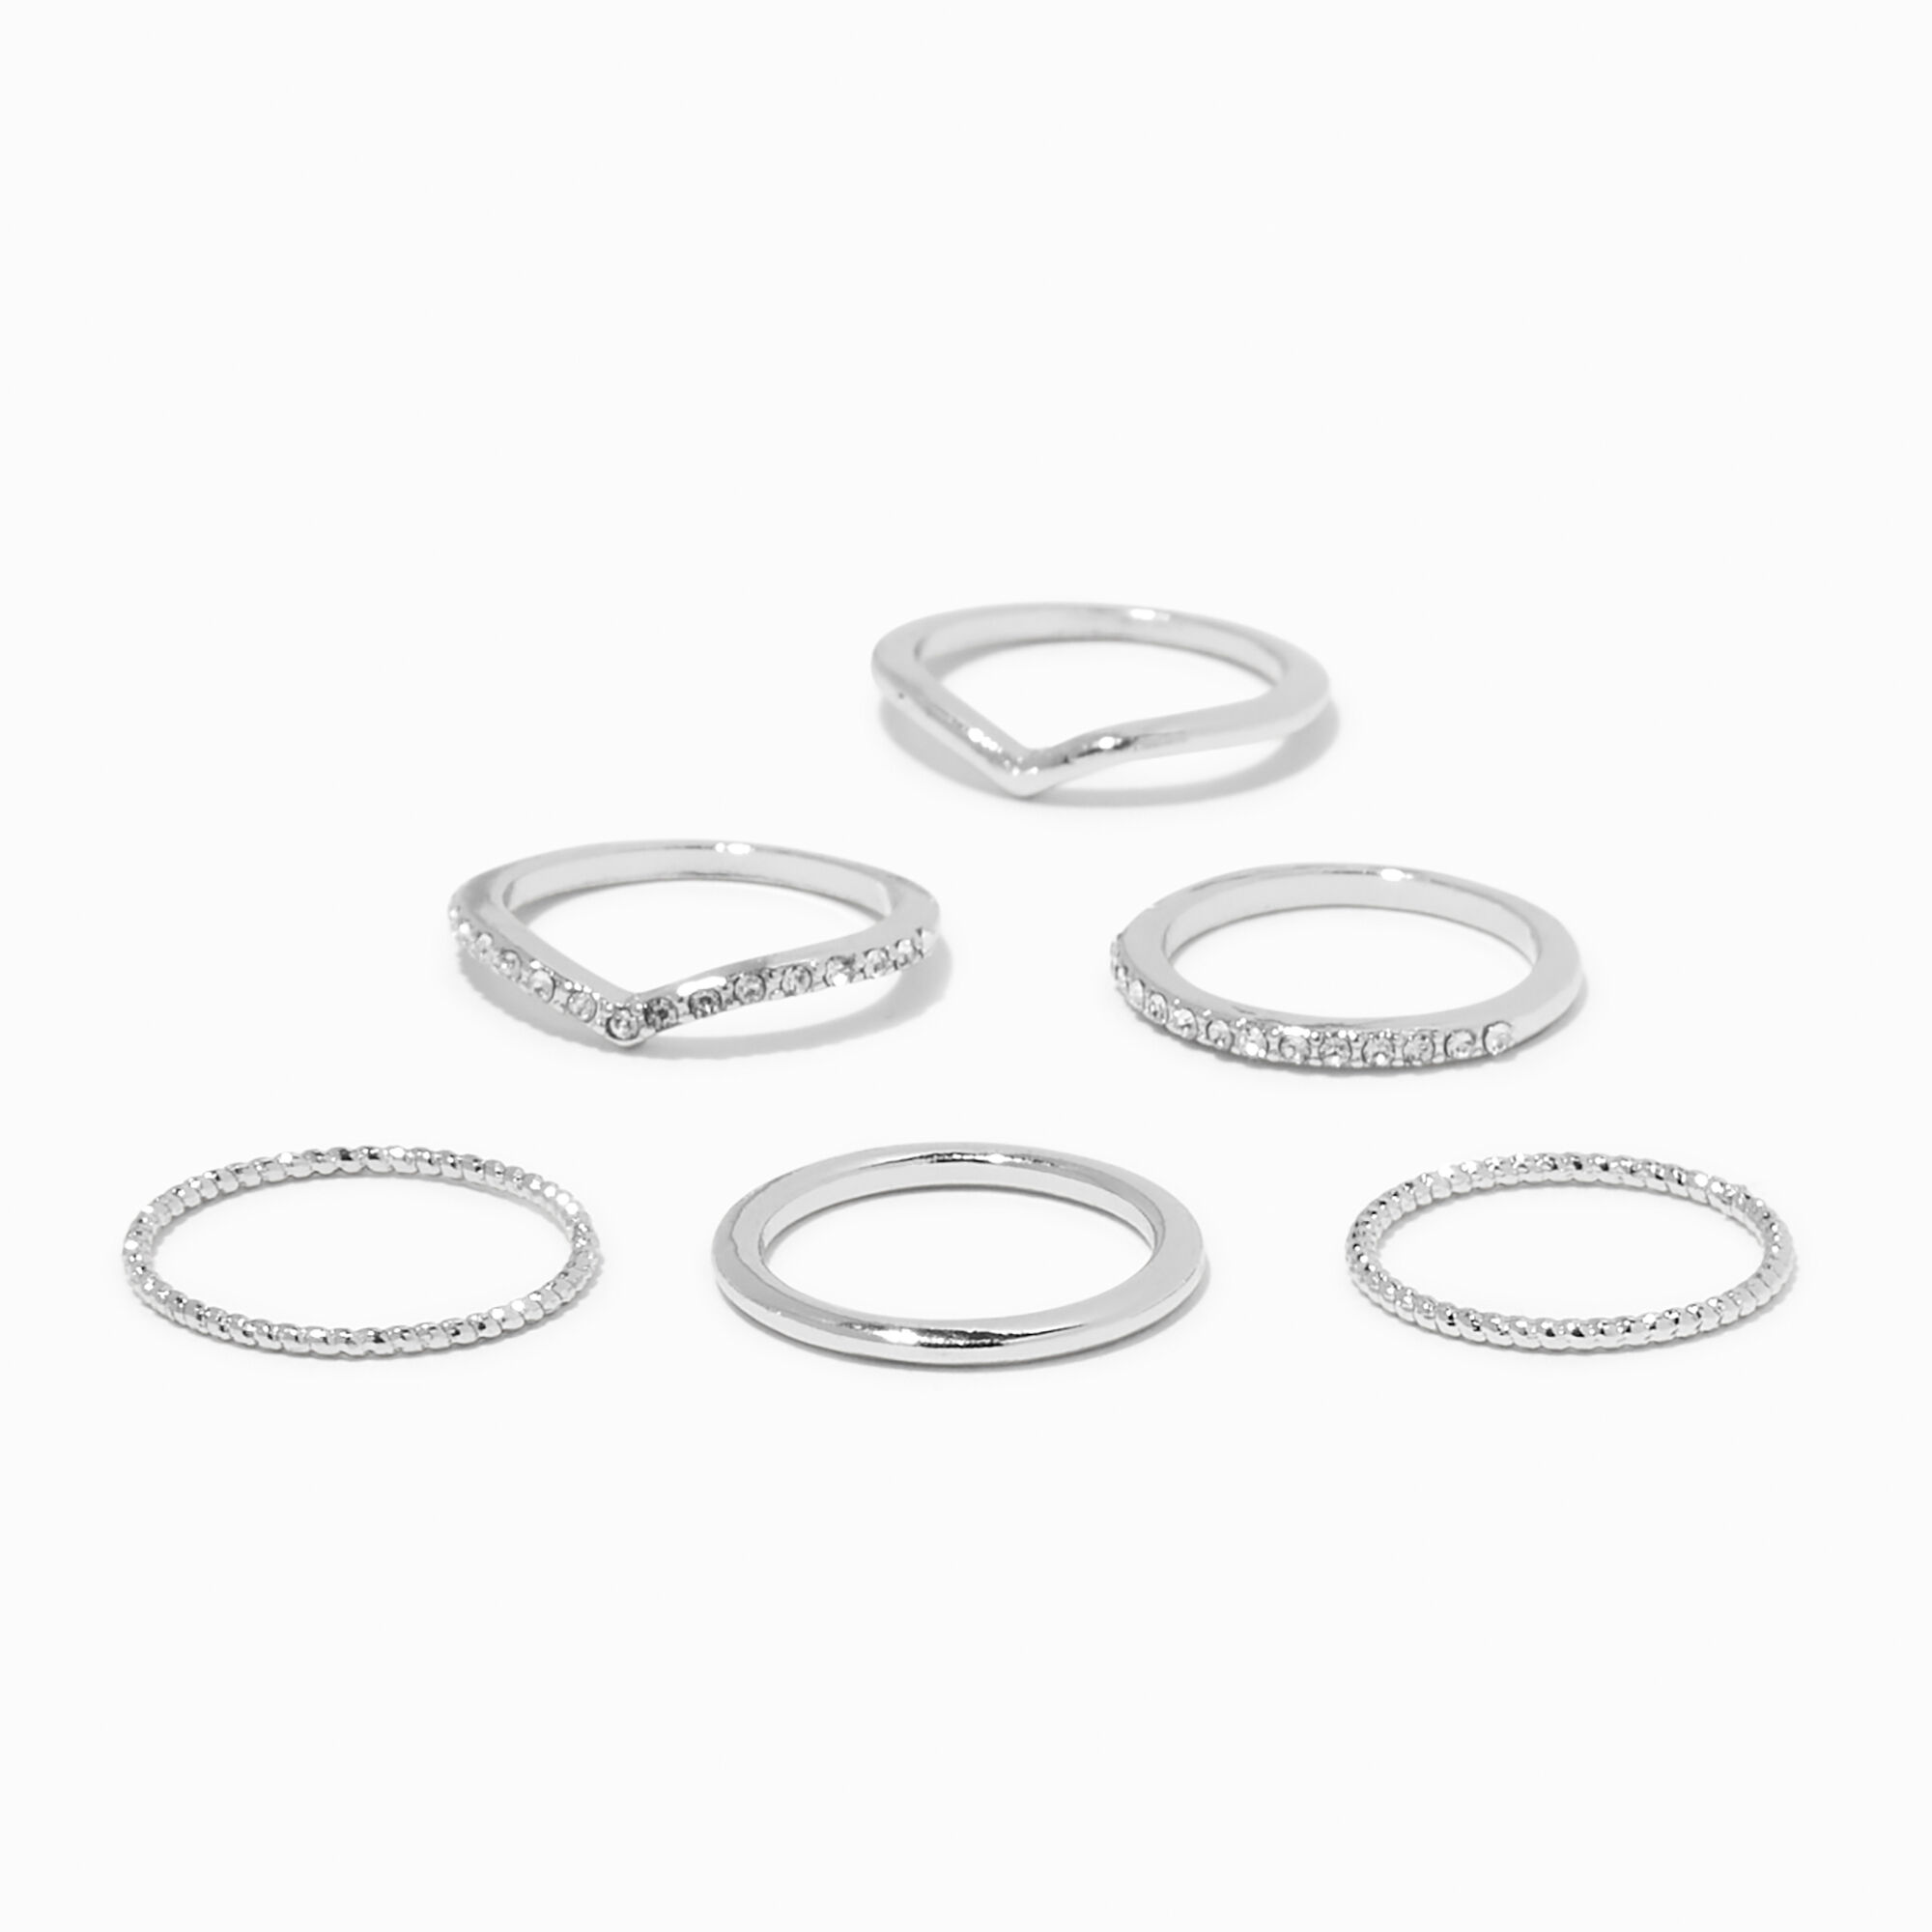 View Claires Delicate Geometric Rings 6 Pack Silver information